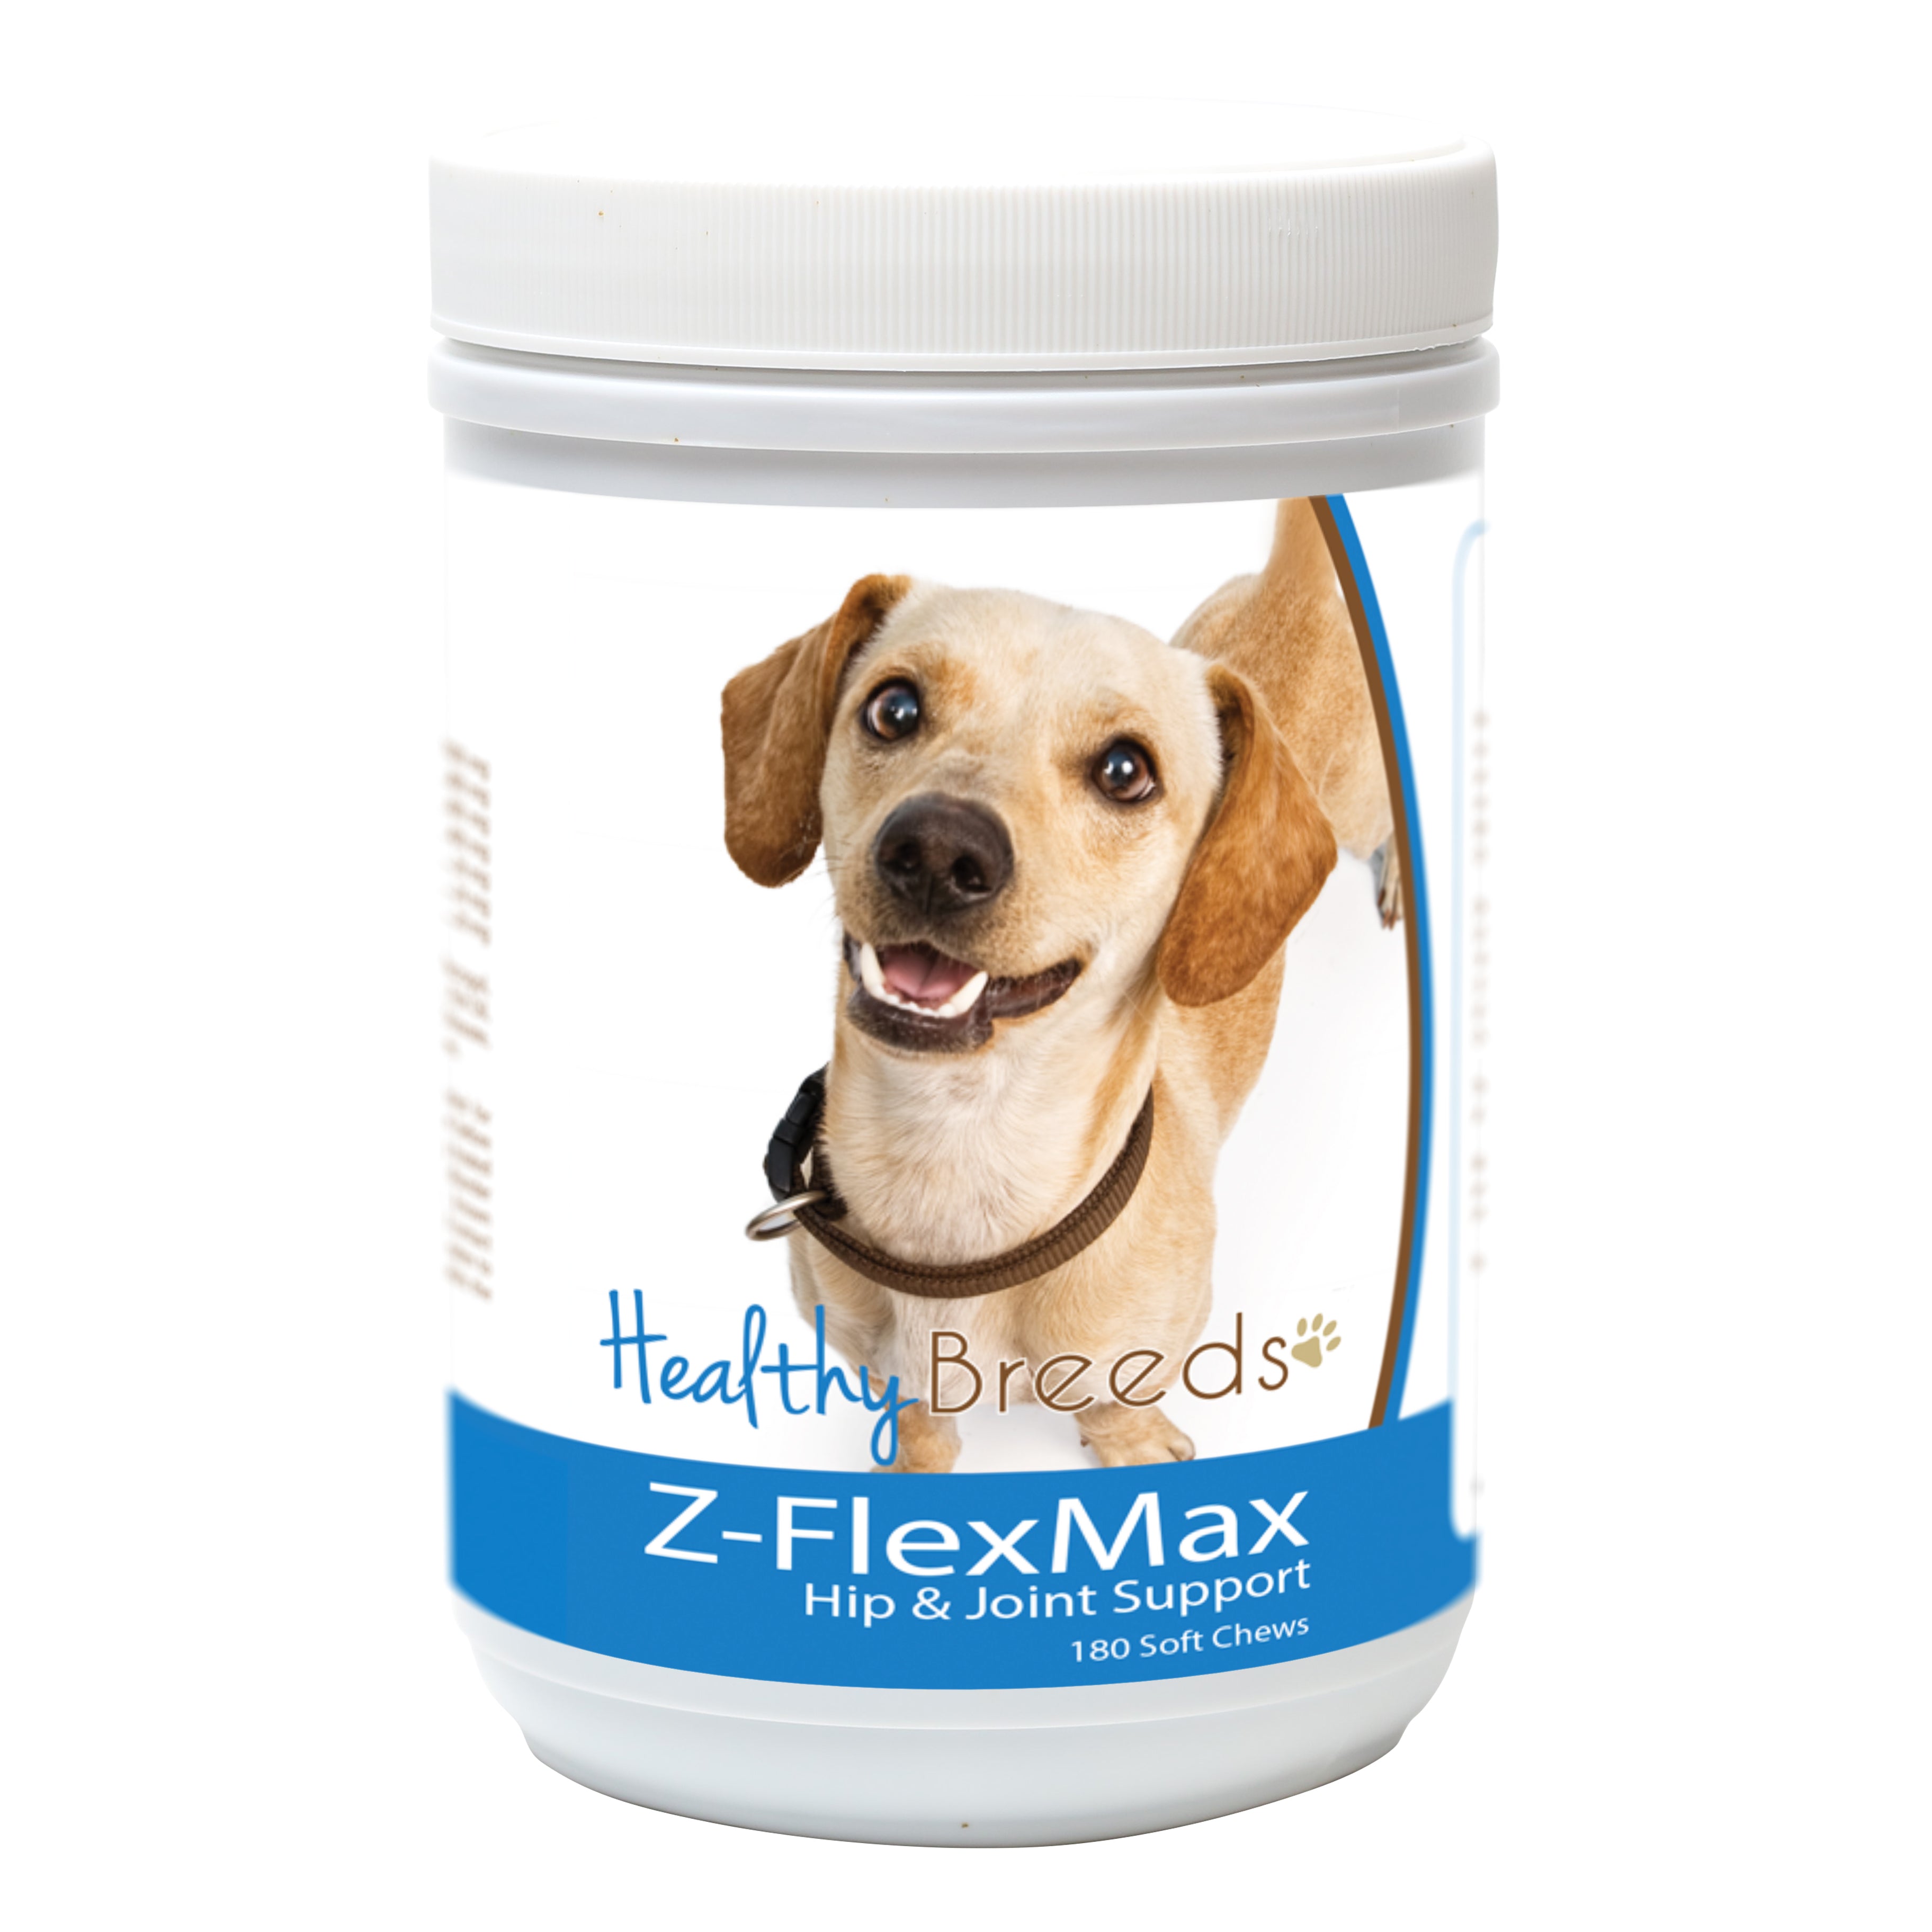 Chiweenie Z-Flex Max Dog Hip and Joint Support 180 Count